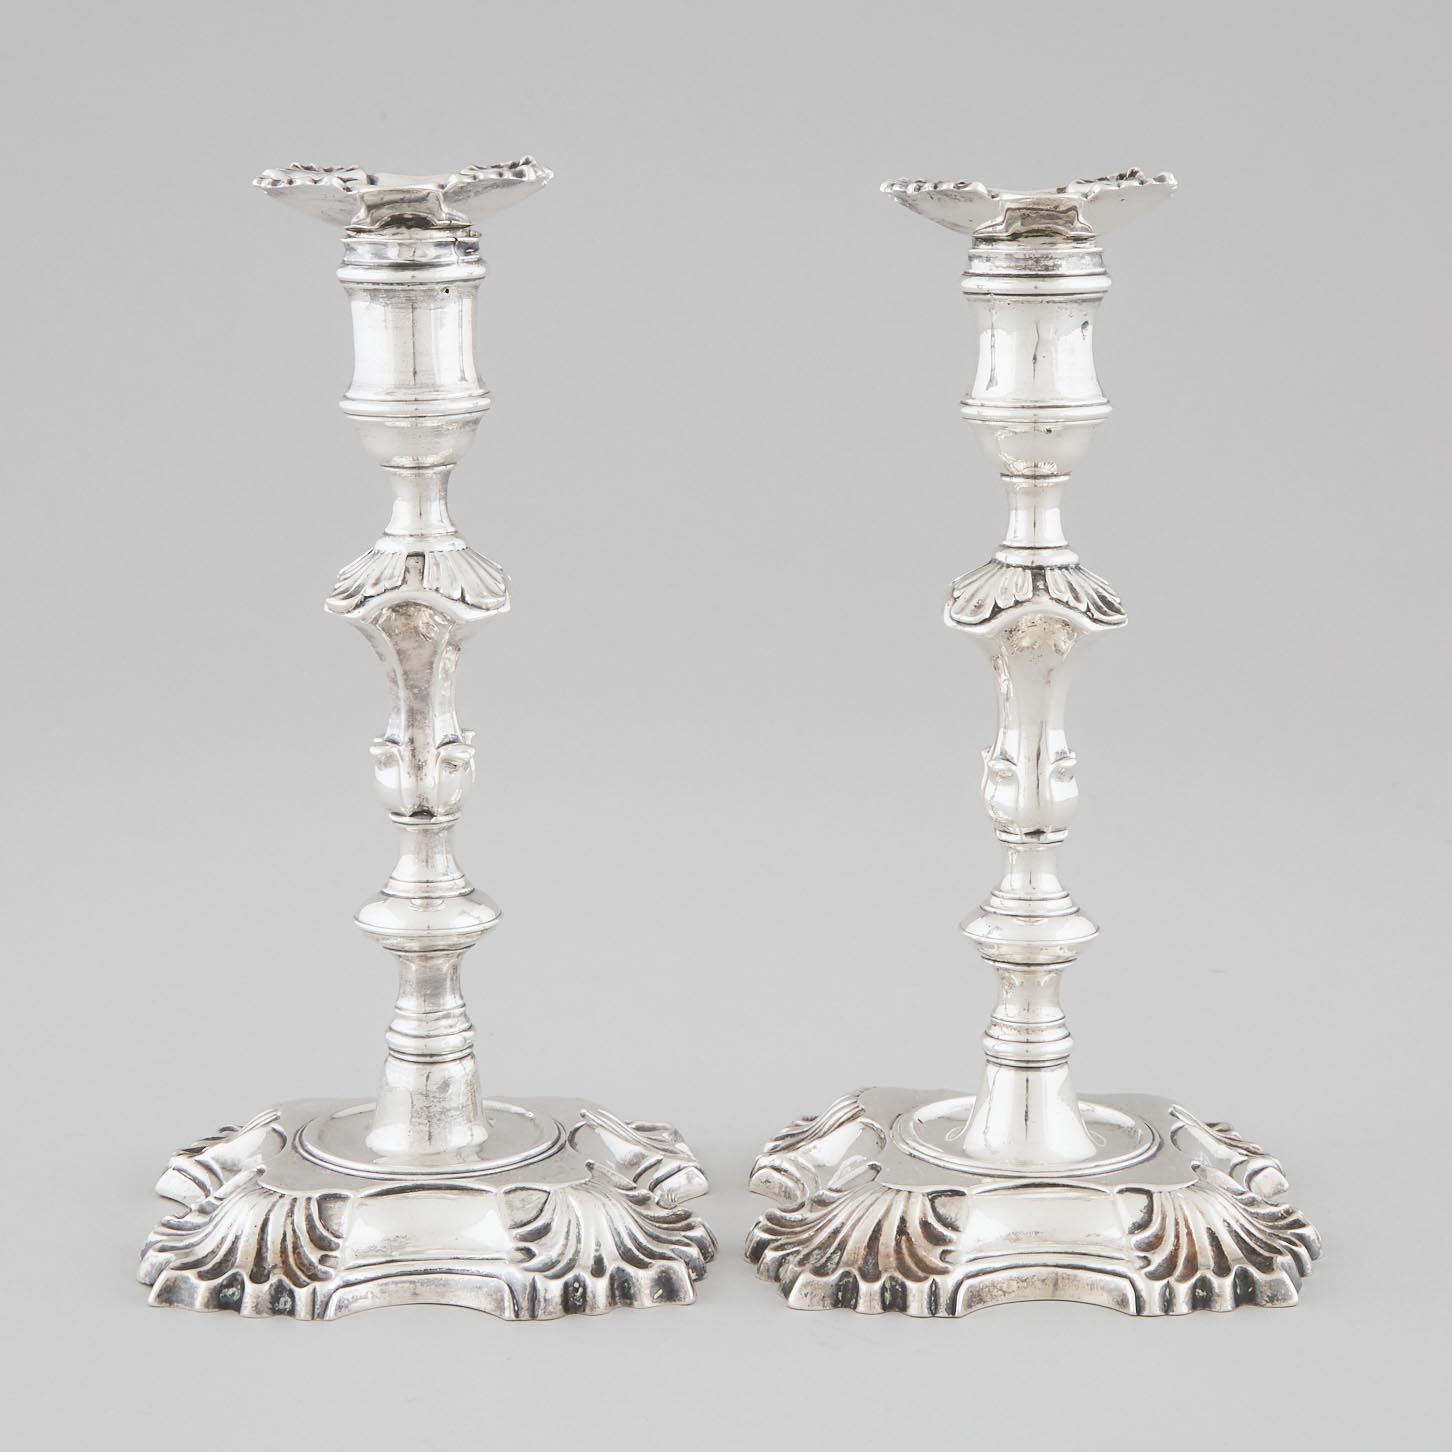 Matching Pair of George II Silver Table Candlesticks, John Cafe and Simon Jouet, London, 1748 and 1752